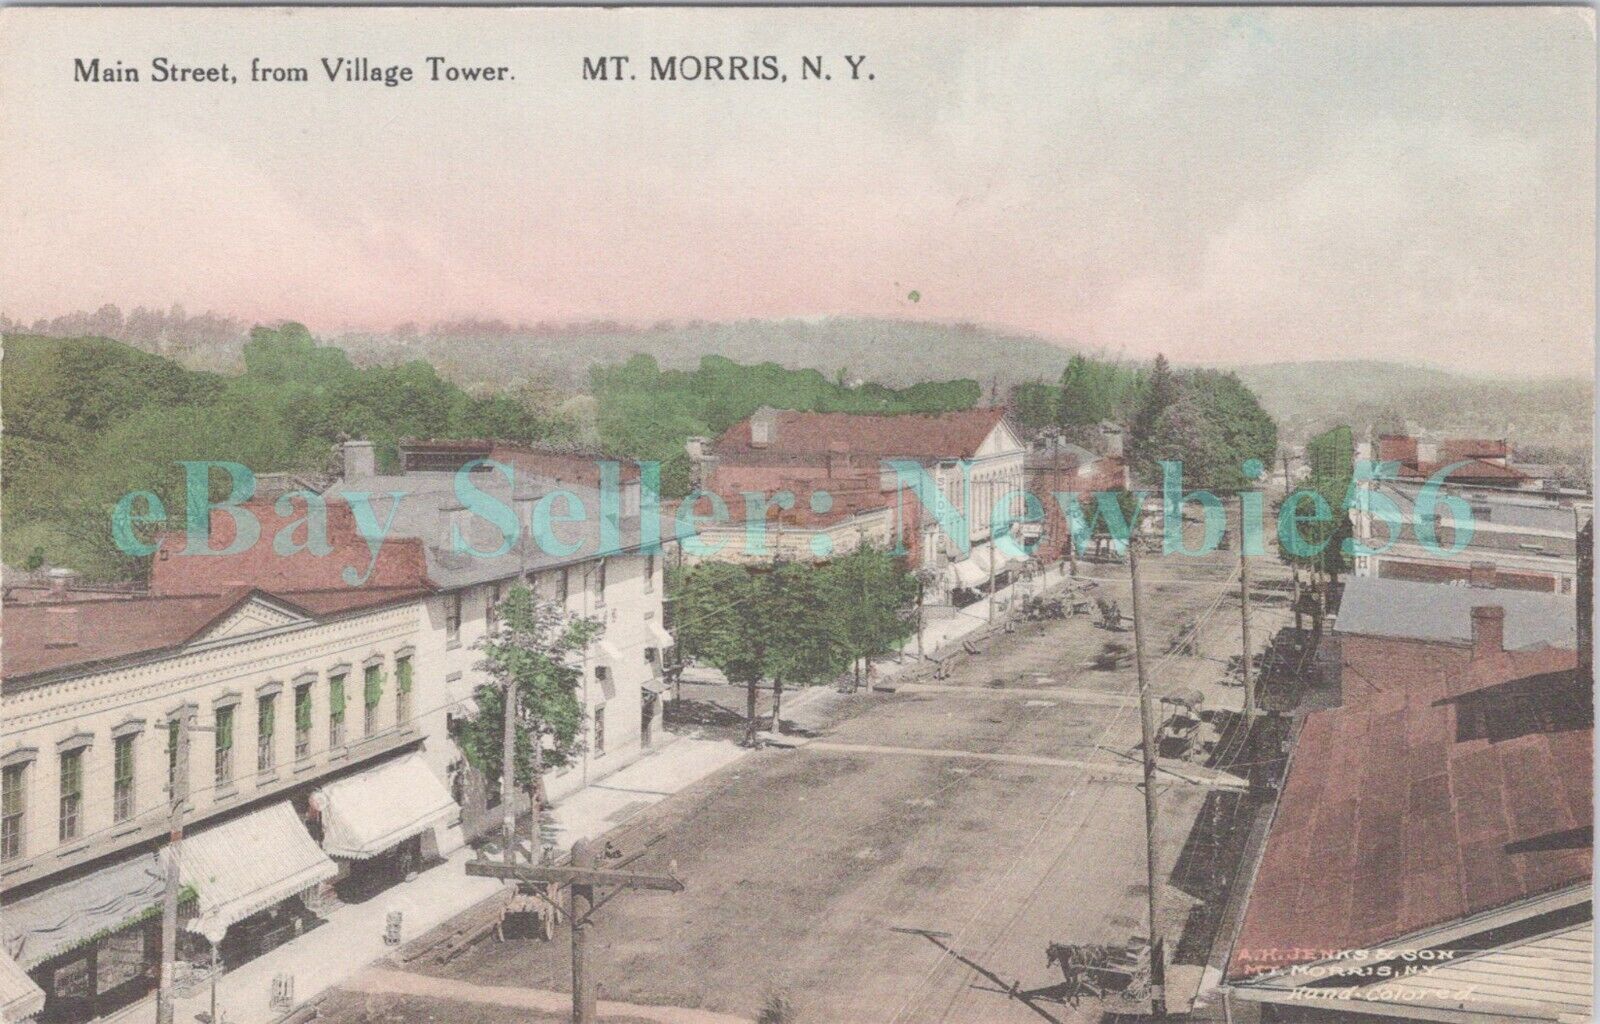 Mount Morris NY - MAIN STREET FROM VILLAGE TOWER - Hand Colored Postcard MT